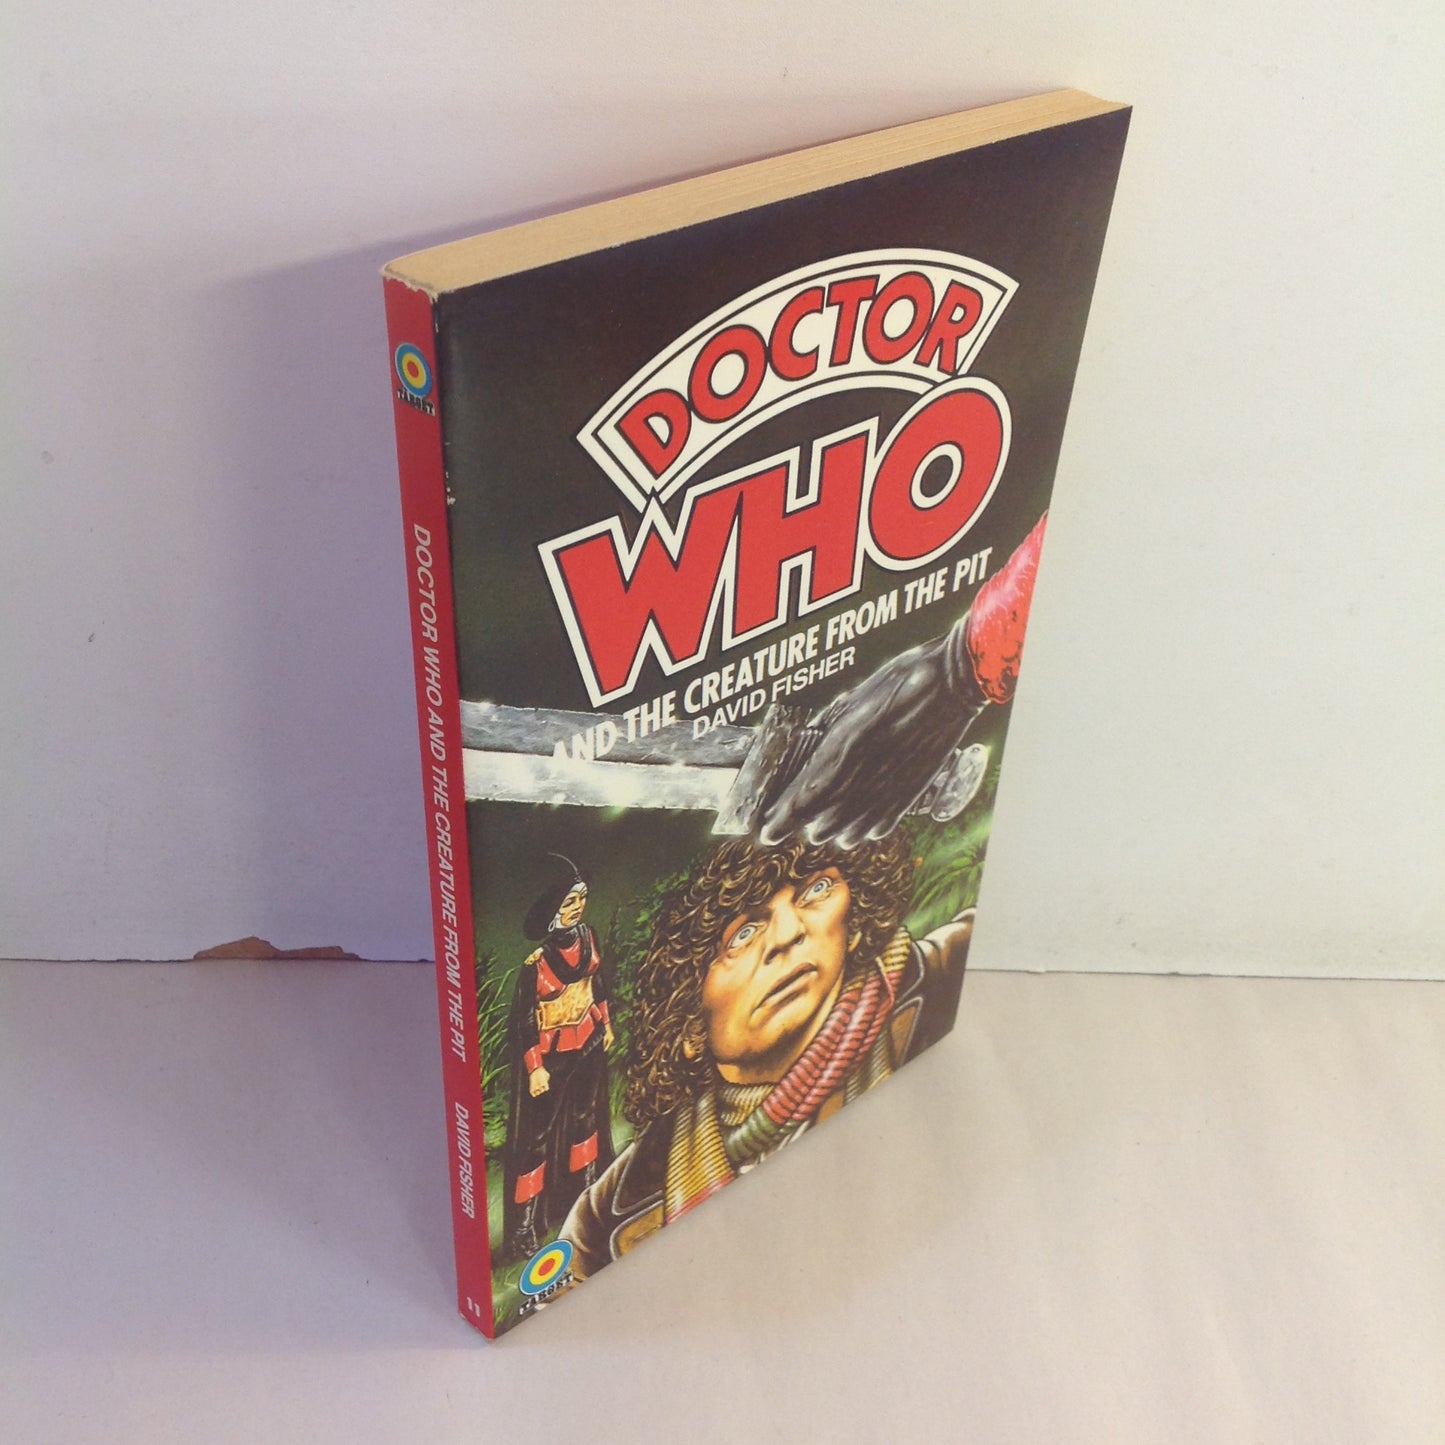 Vintage 1984 Mass Market Paperback Doctor Who and the Creature from the Pit David Fisher